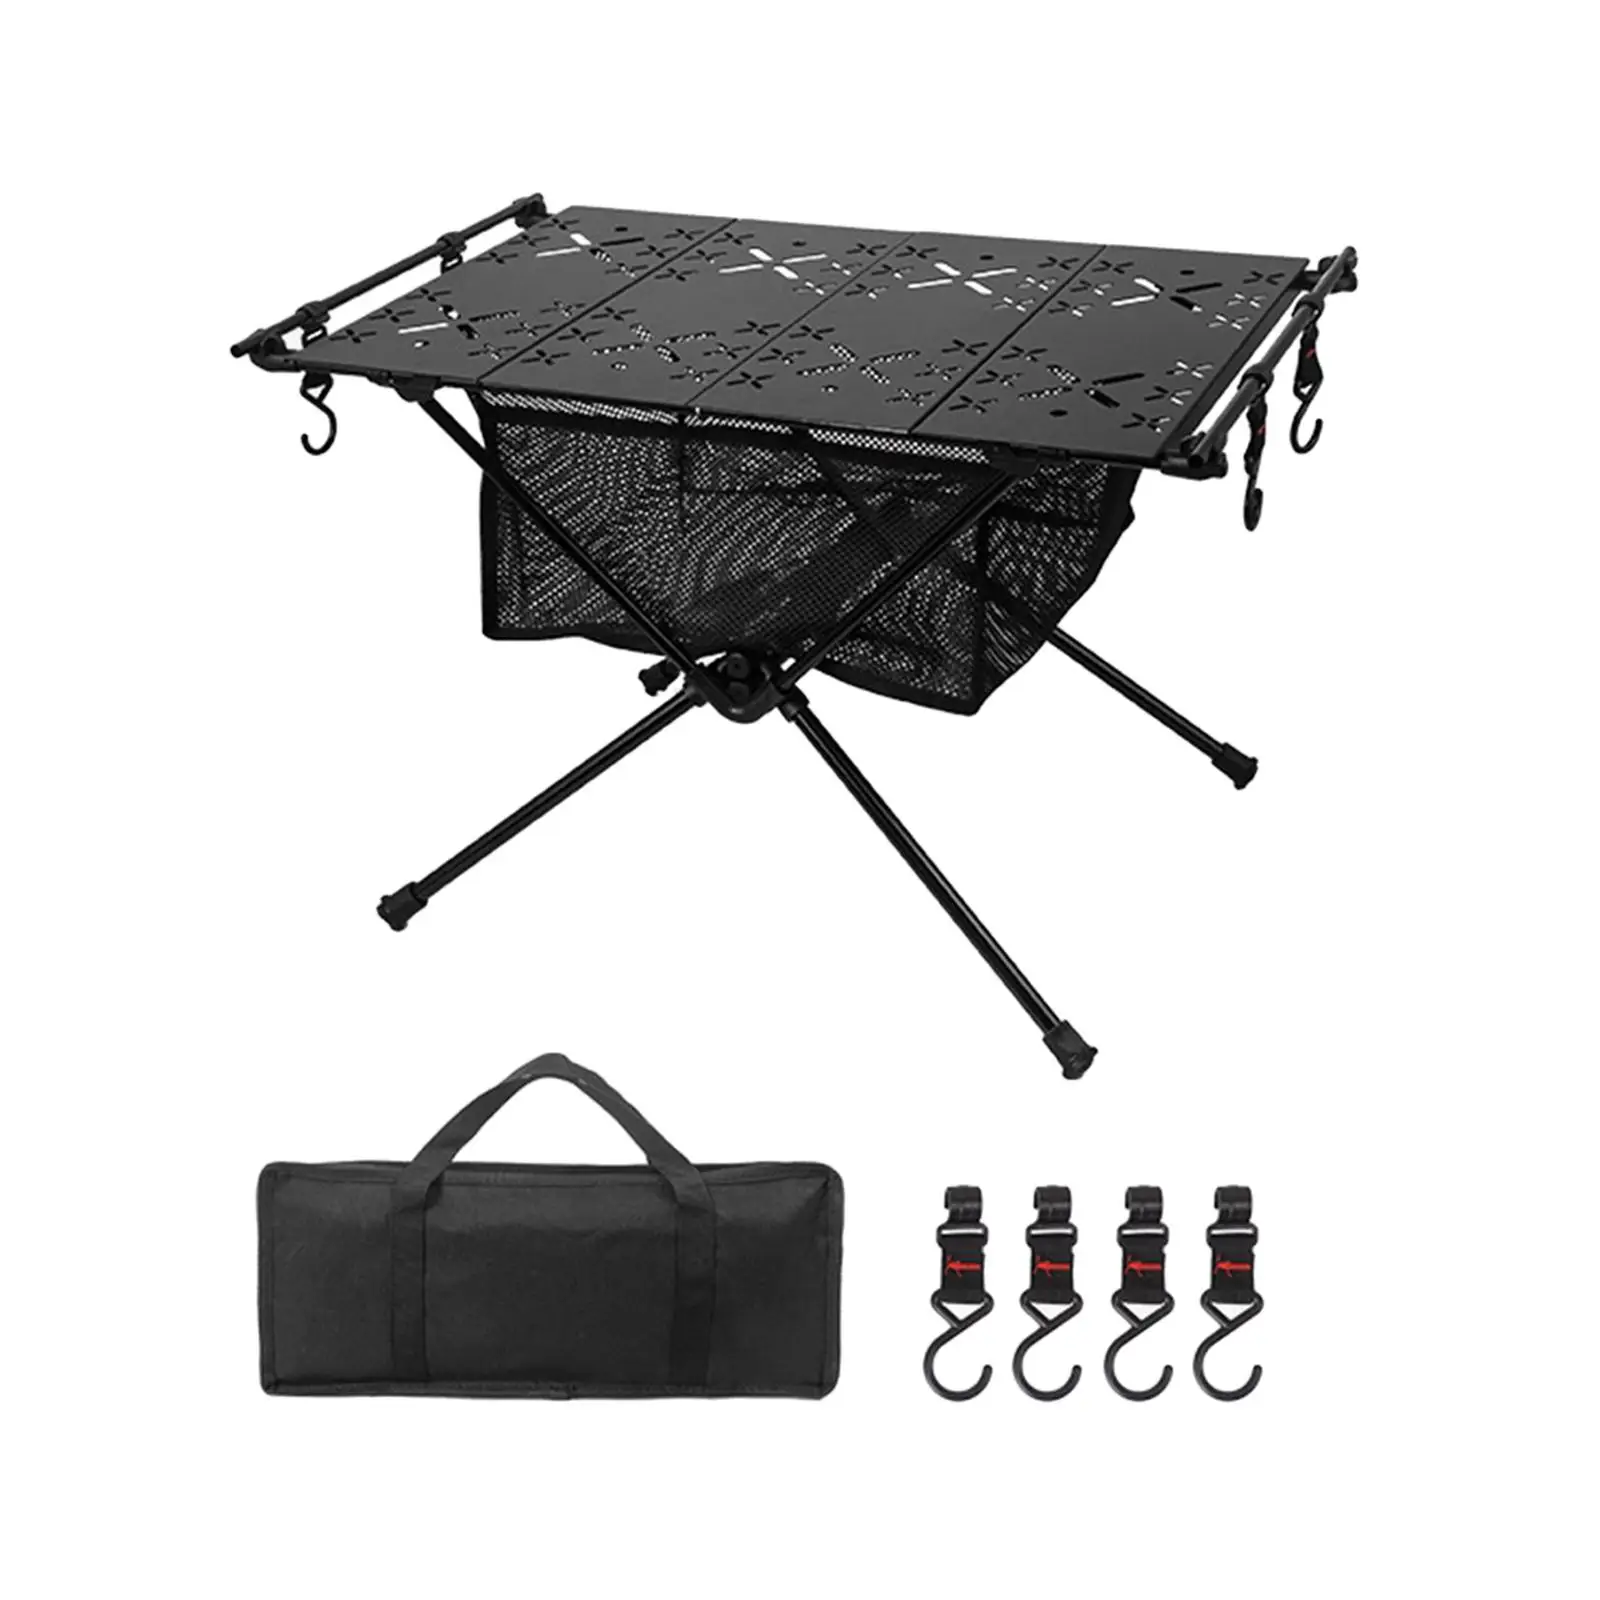 Foldable Camping Table Furniture Camp Table with Carry Bag Beach Table Outdoor Foldable Table for Garden Travel BBQ Patio Yard